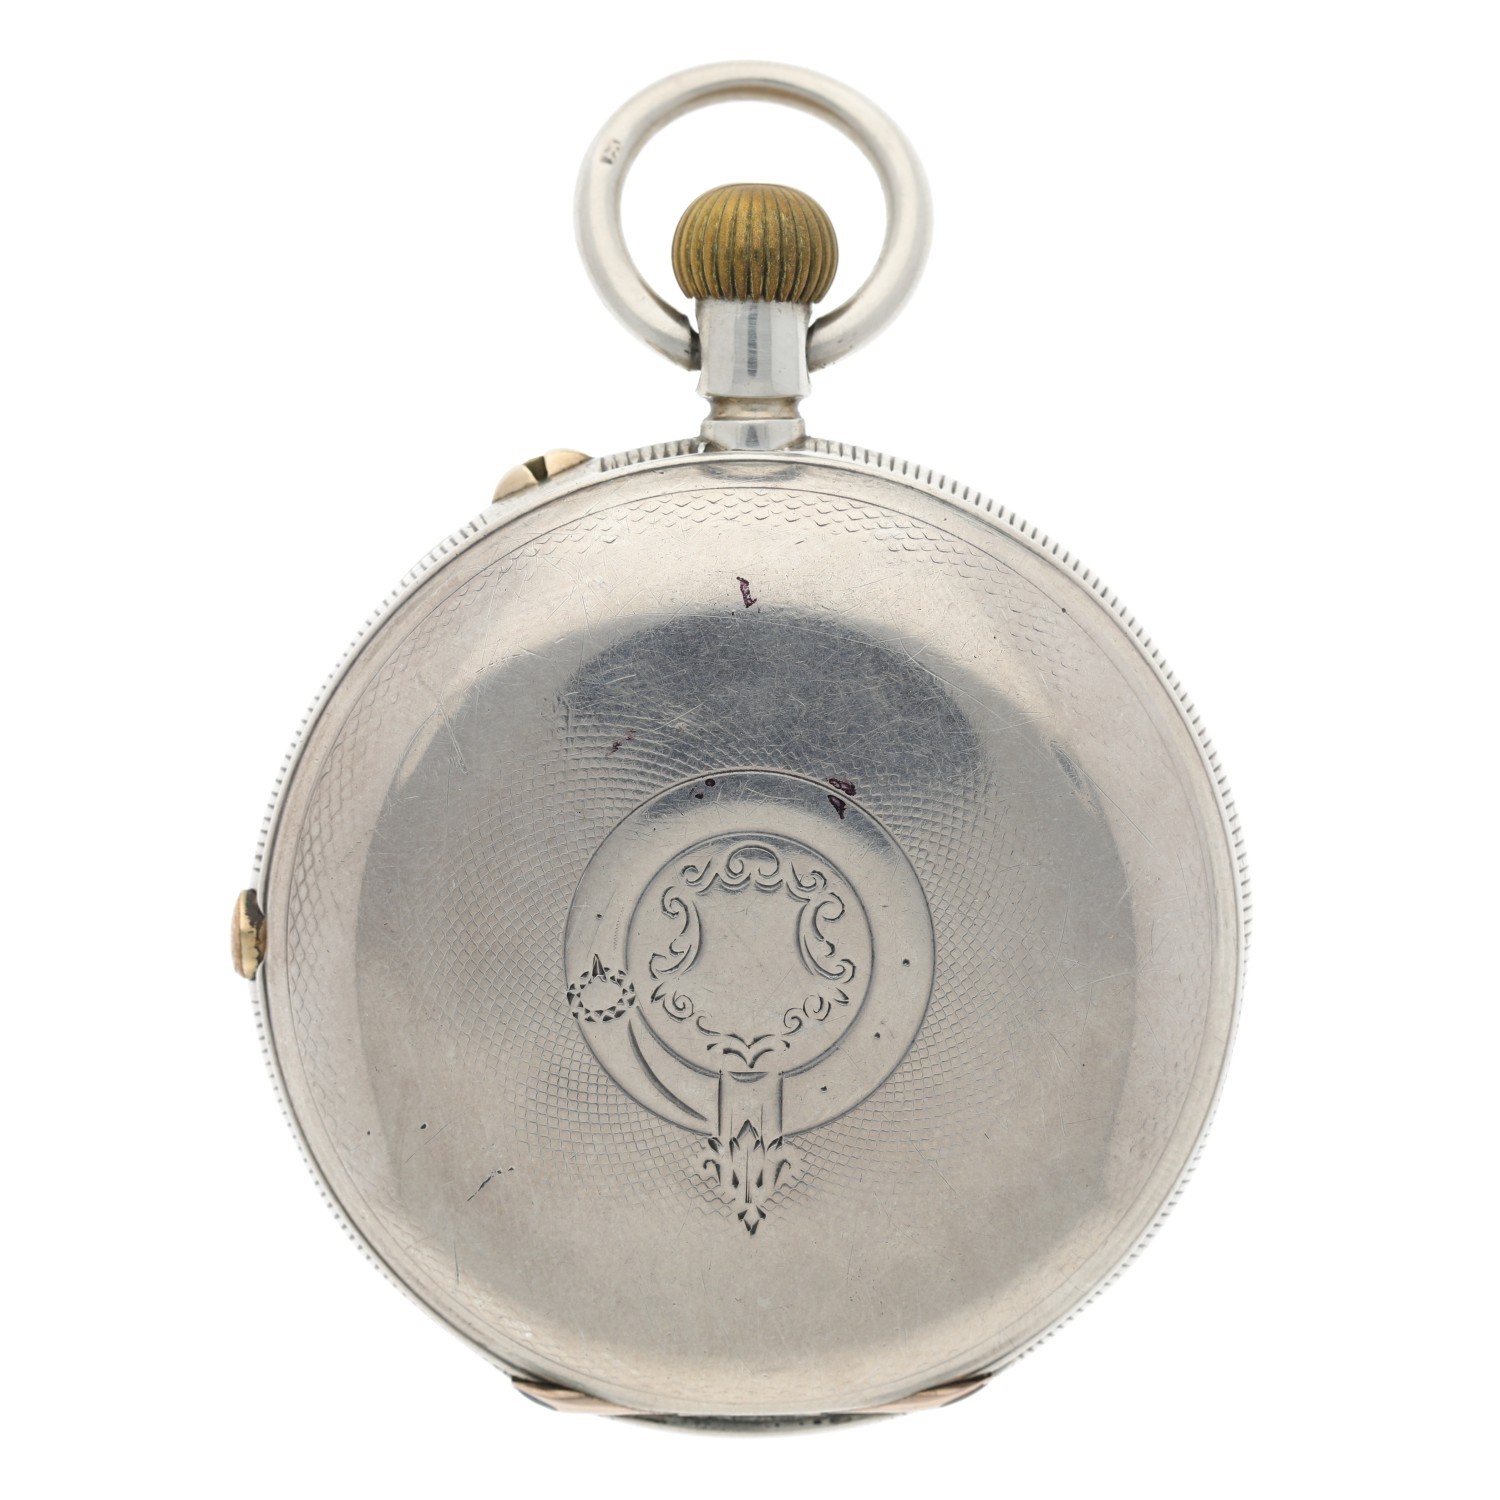 H. Ridgeway, London - Victorian silver centre seconds chronograph lever hunter pocket watch, - Image 4 of 5